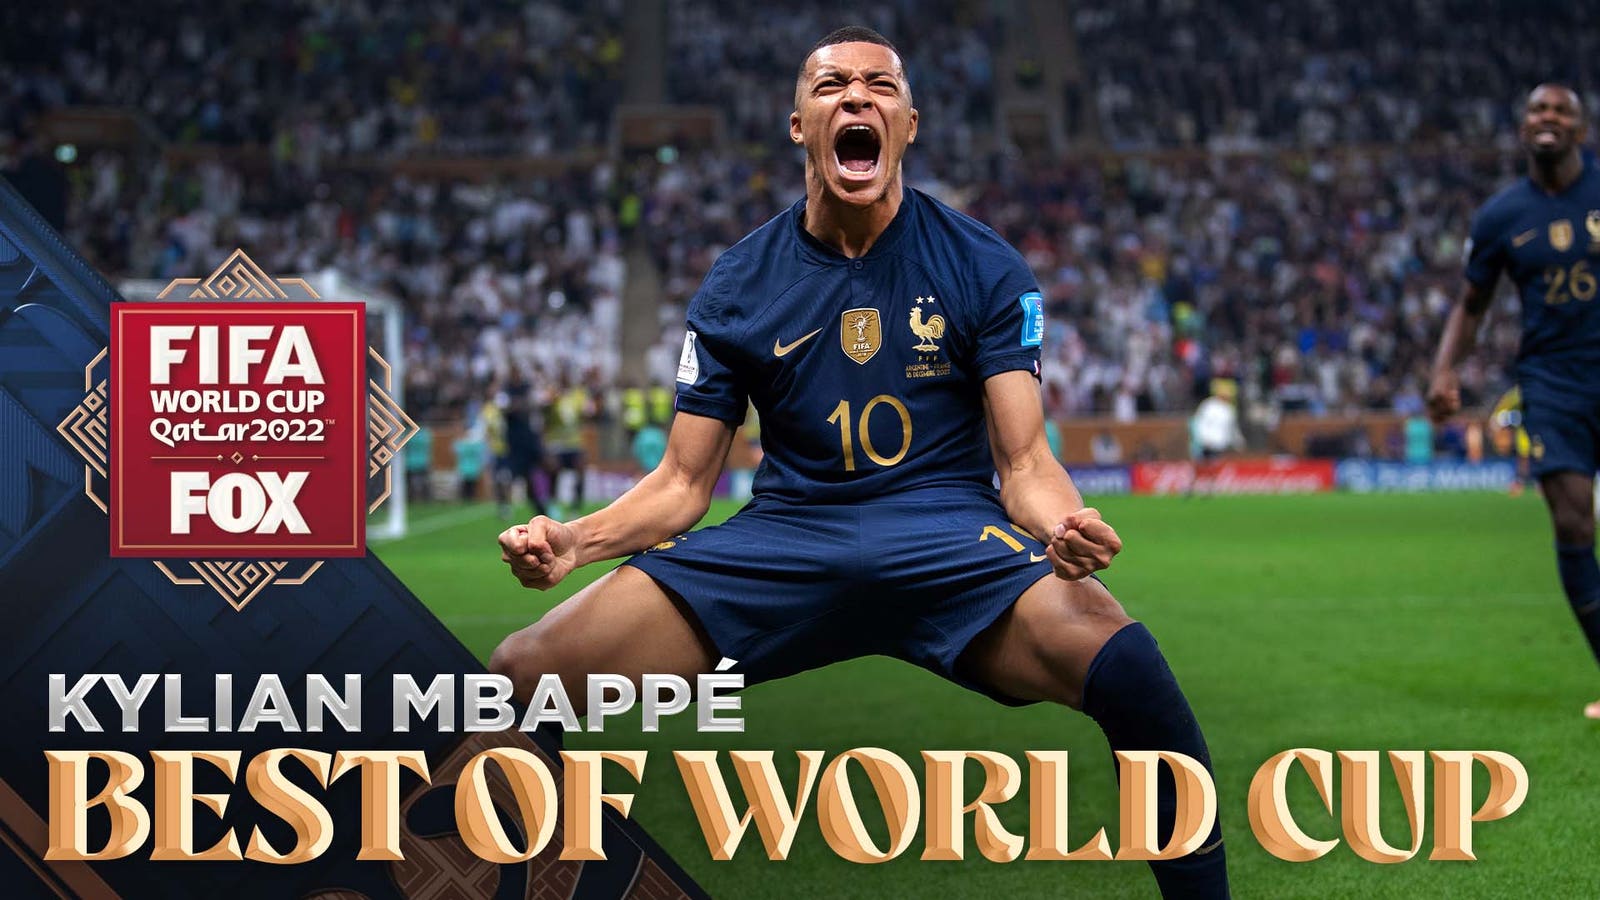 Kylian Mbappé's best moments for France in the 2022 FIFA World Cup